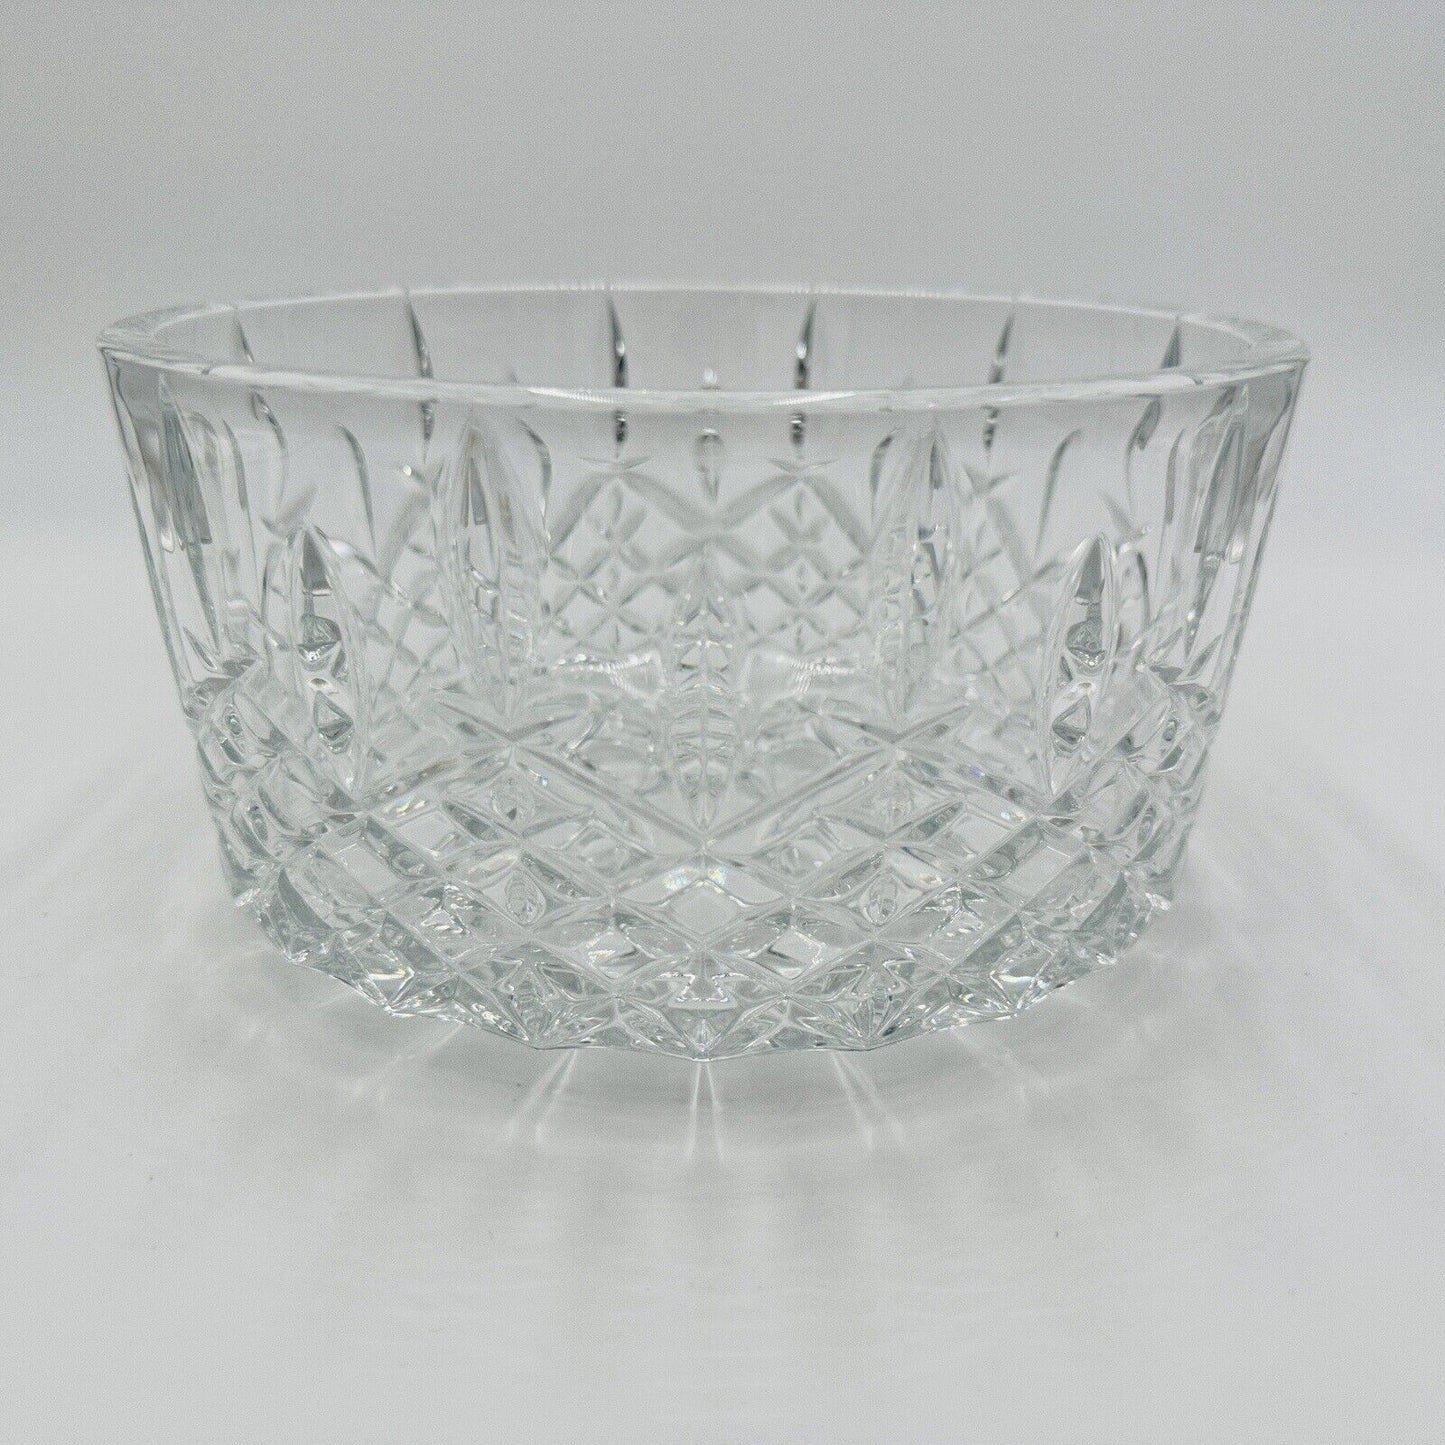 Marquis by Waterford Lead Crystal Markham 9"  Centerpiece Fruit Bowl Large Decor